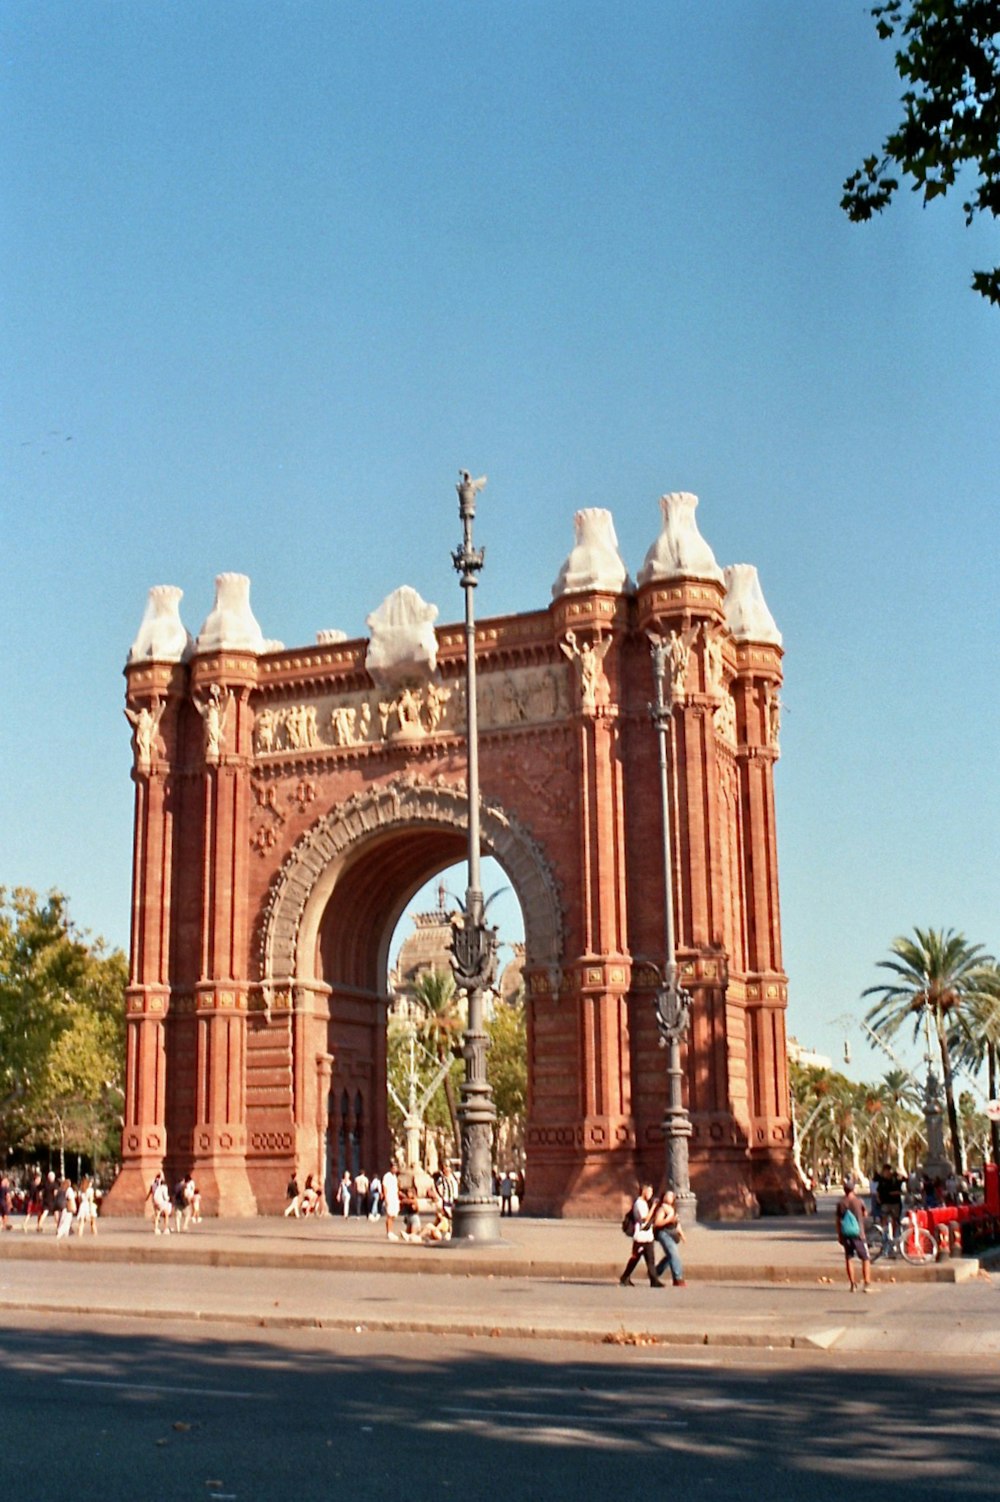 a large arch with a clock on top of it